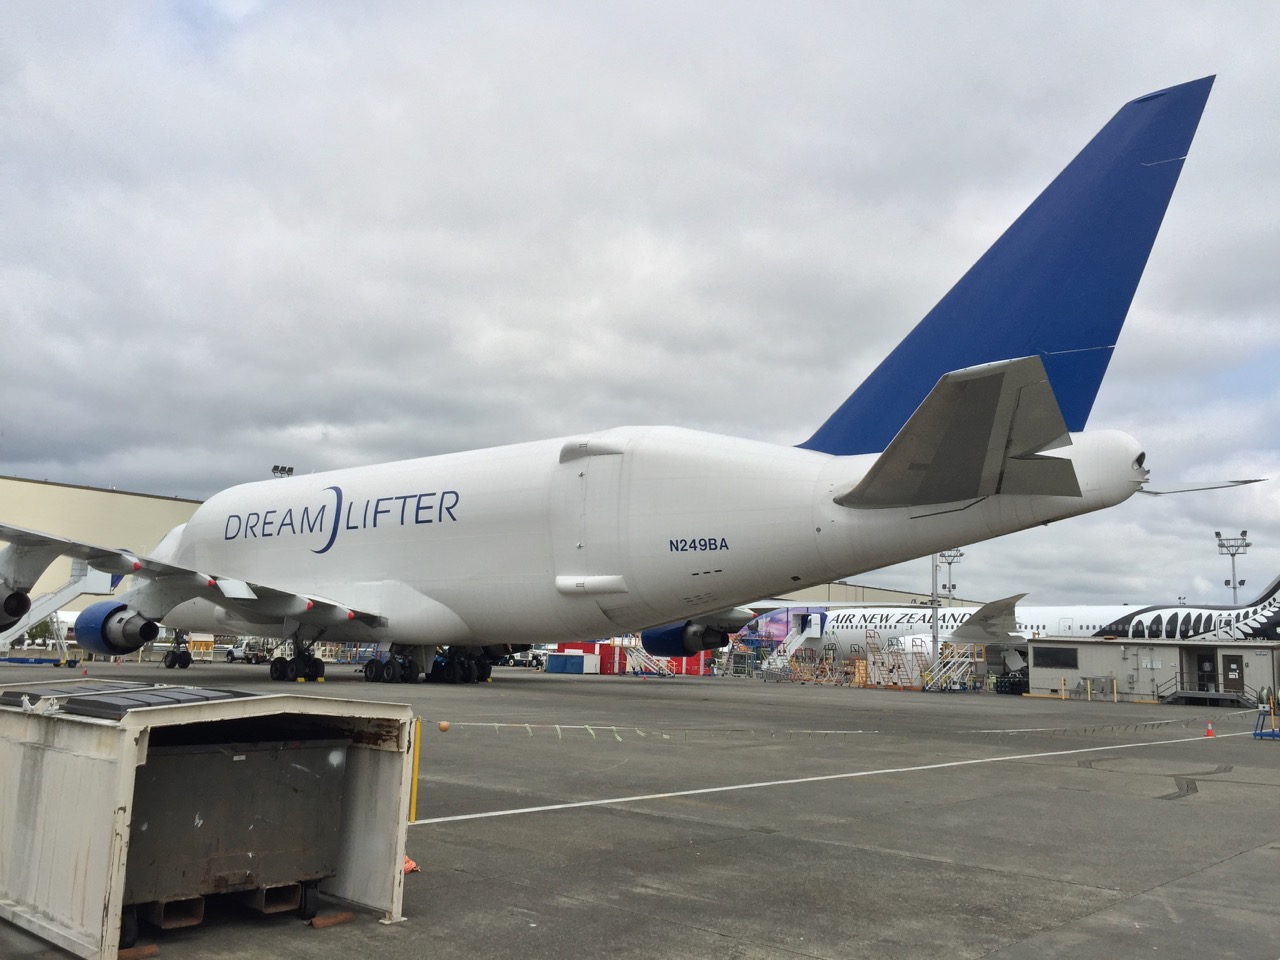 photos from Family Day at the Boeing Everett Factory (56k use the